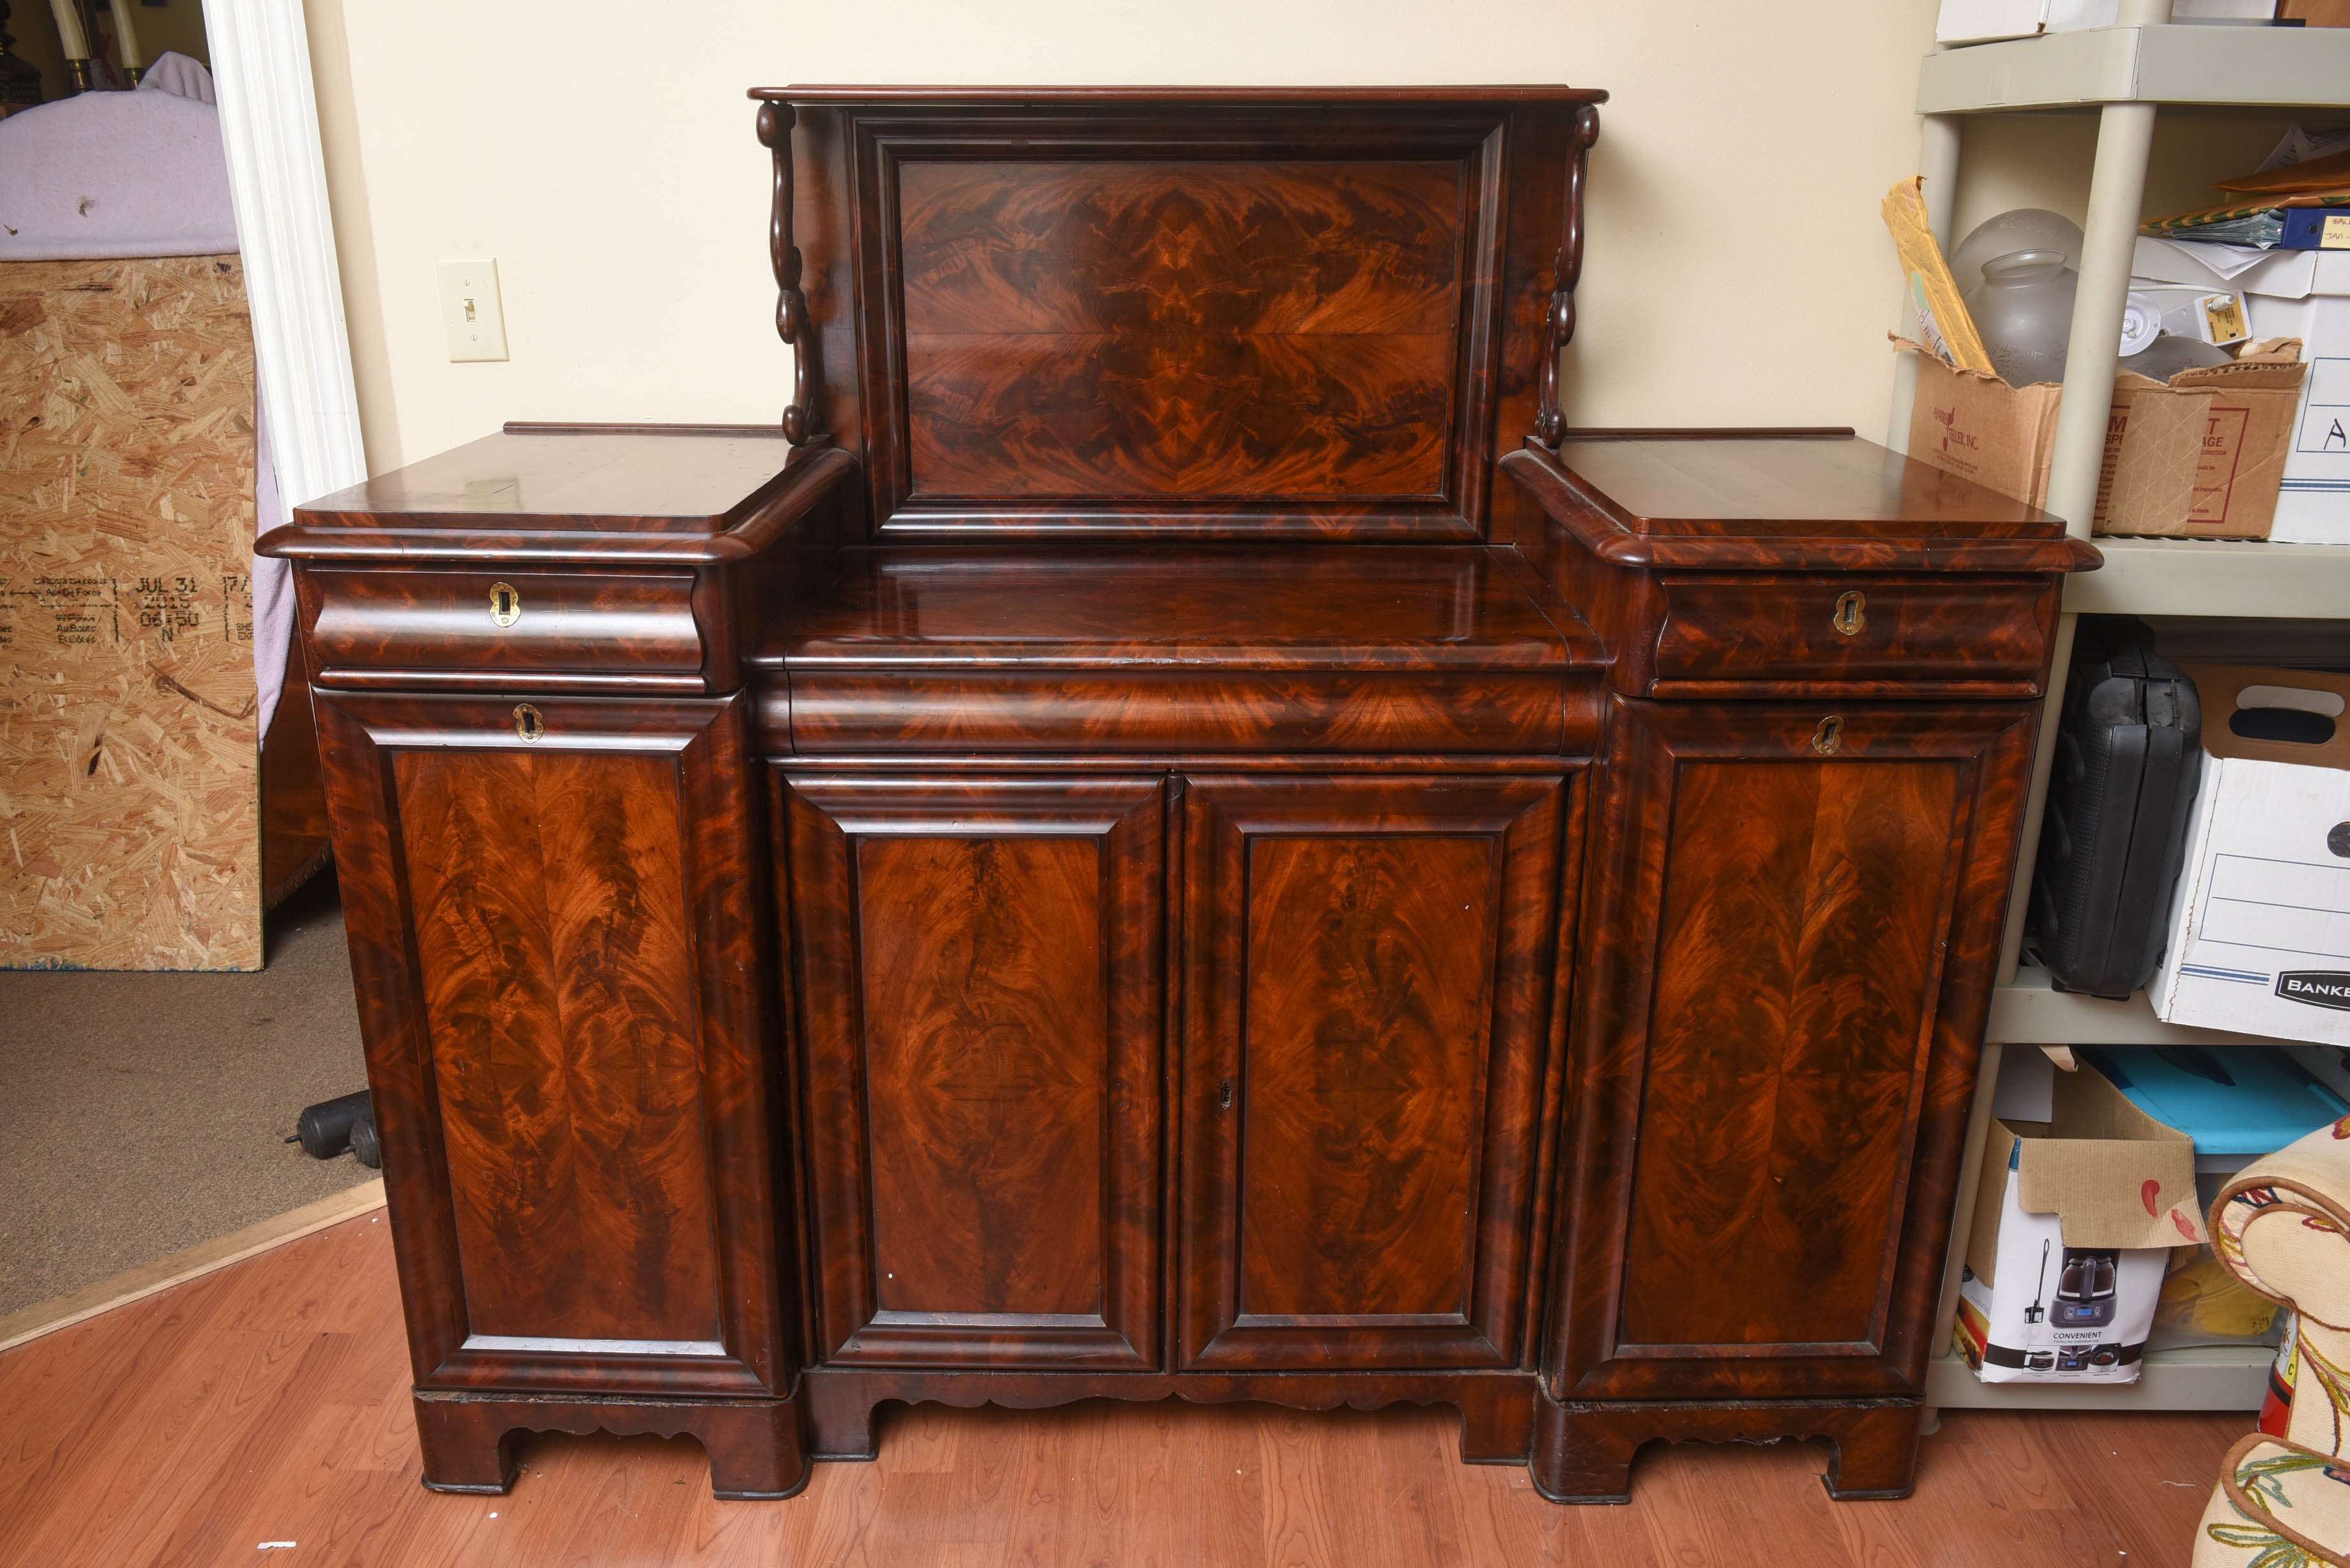 19th Century French Mahogany Sideboard and Secretaire